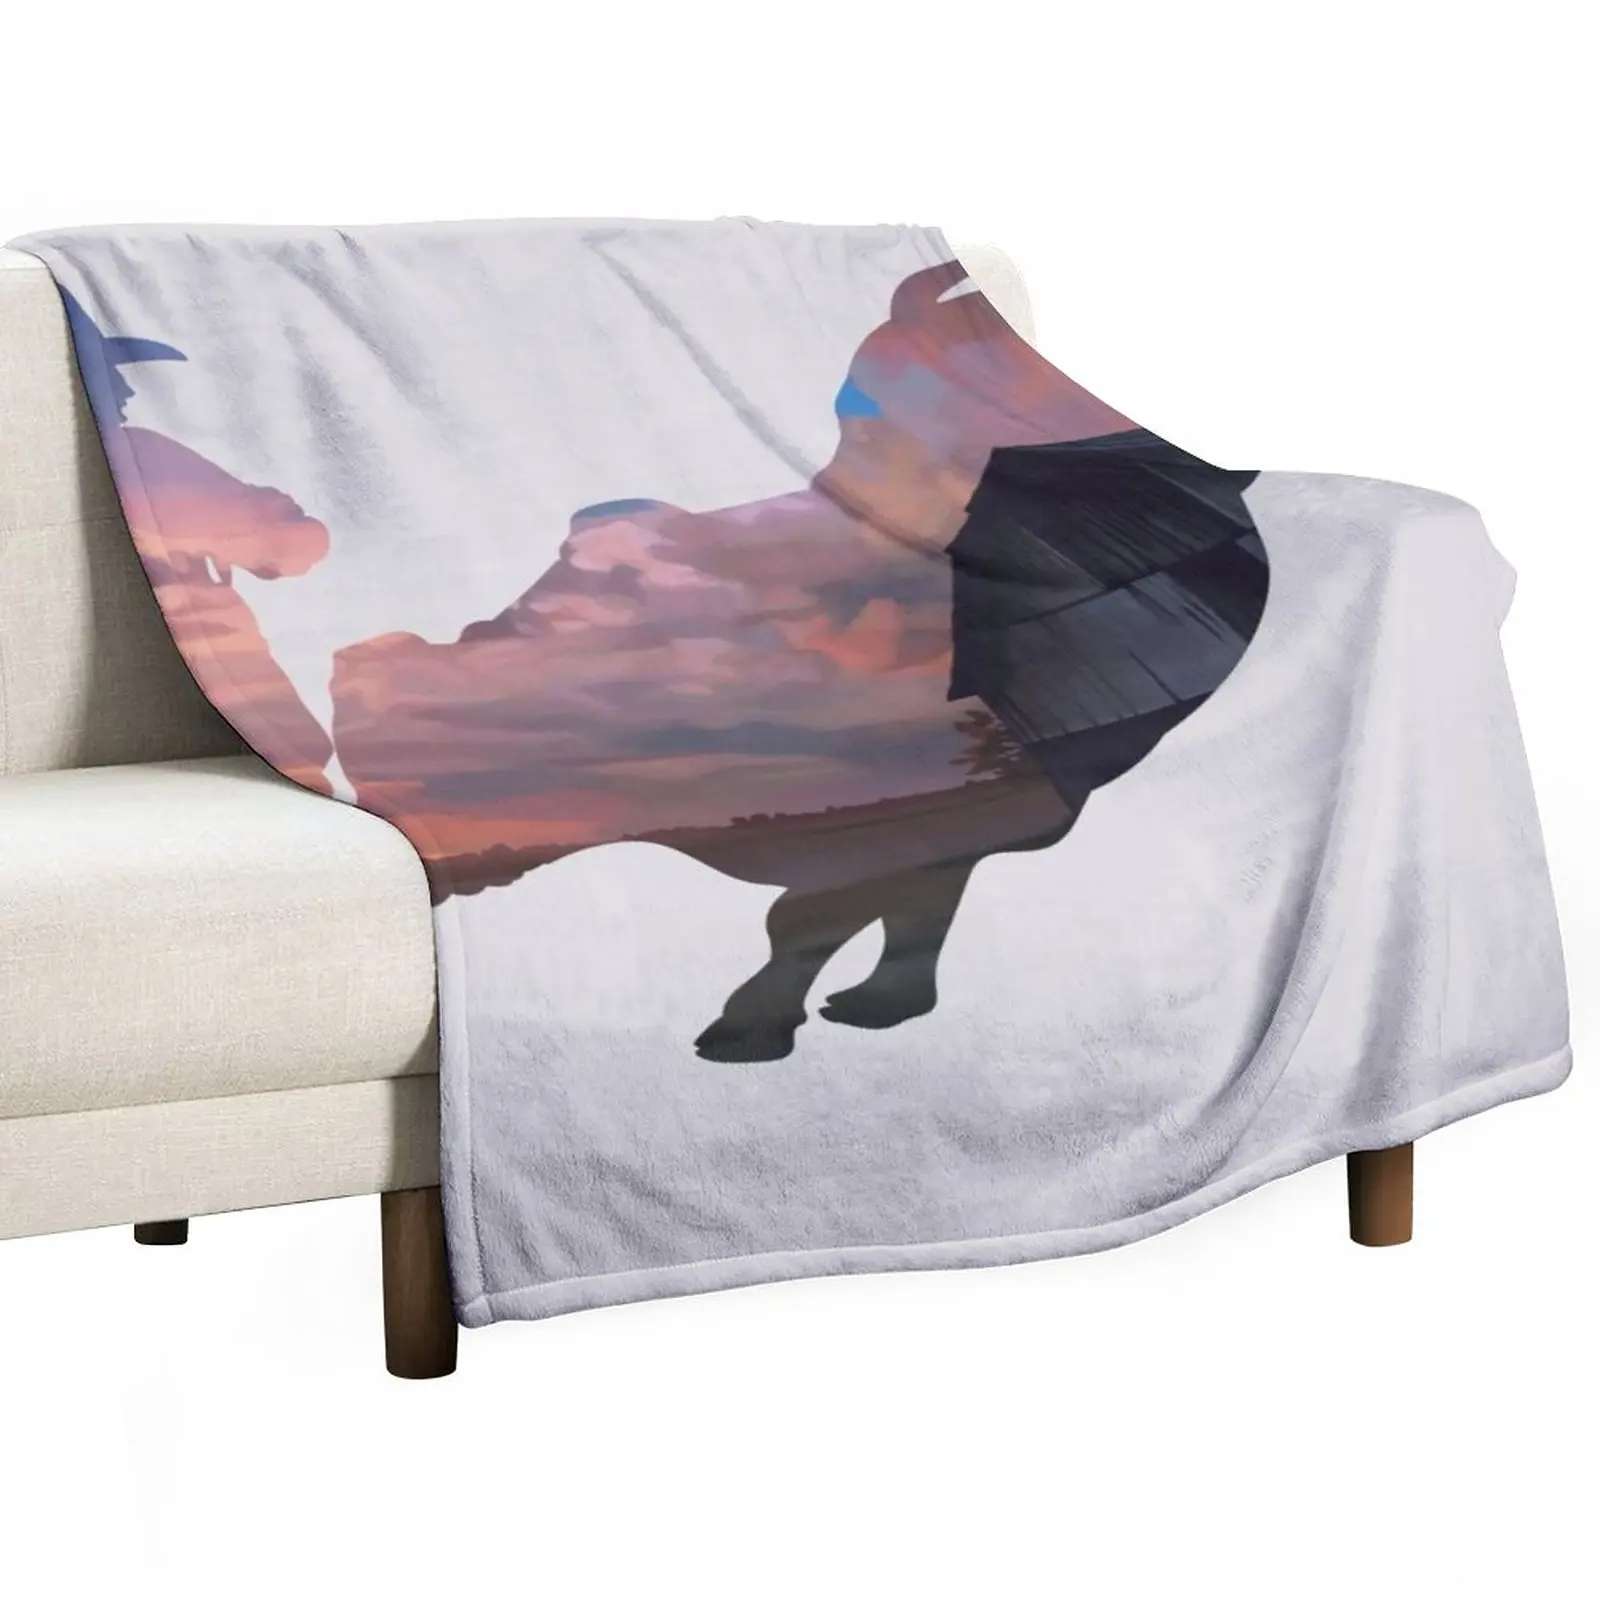 

Rodeo Clown 1: Farm Sunset Throw Blanket Luxury St Blanket Flannel Fabric Sofa Blankets Extra Large Throw Blanket